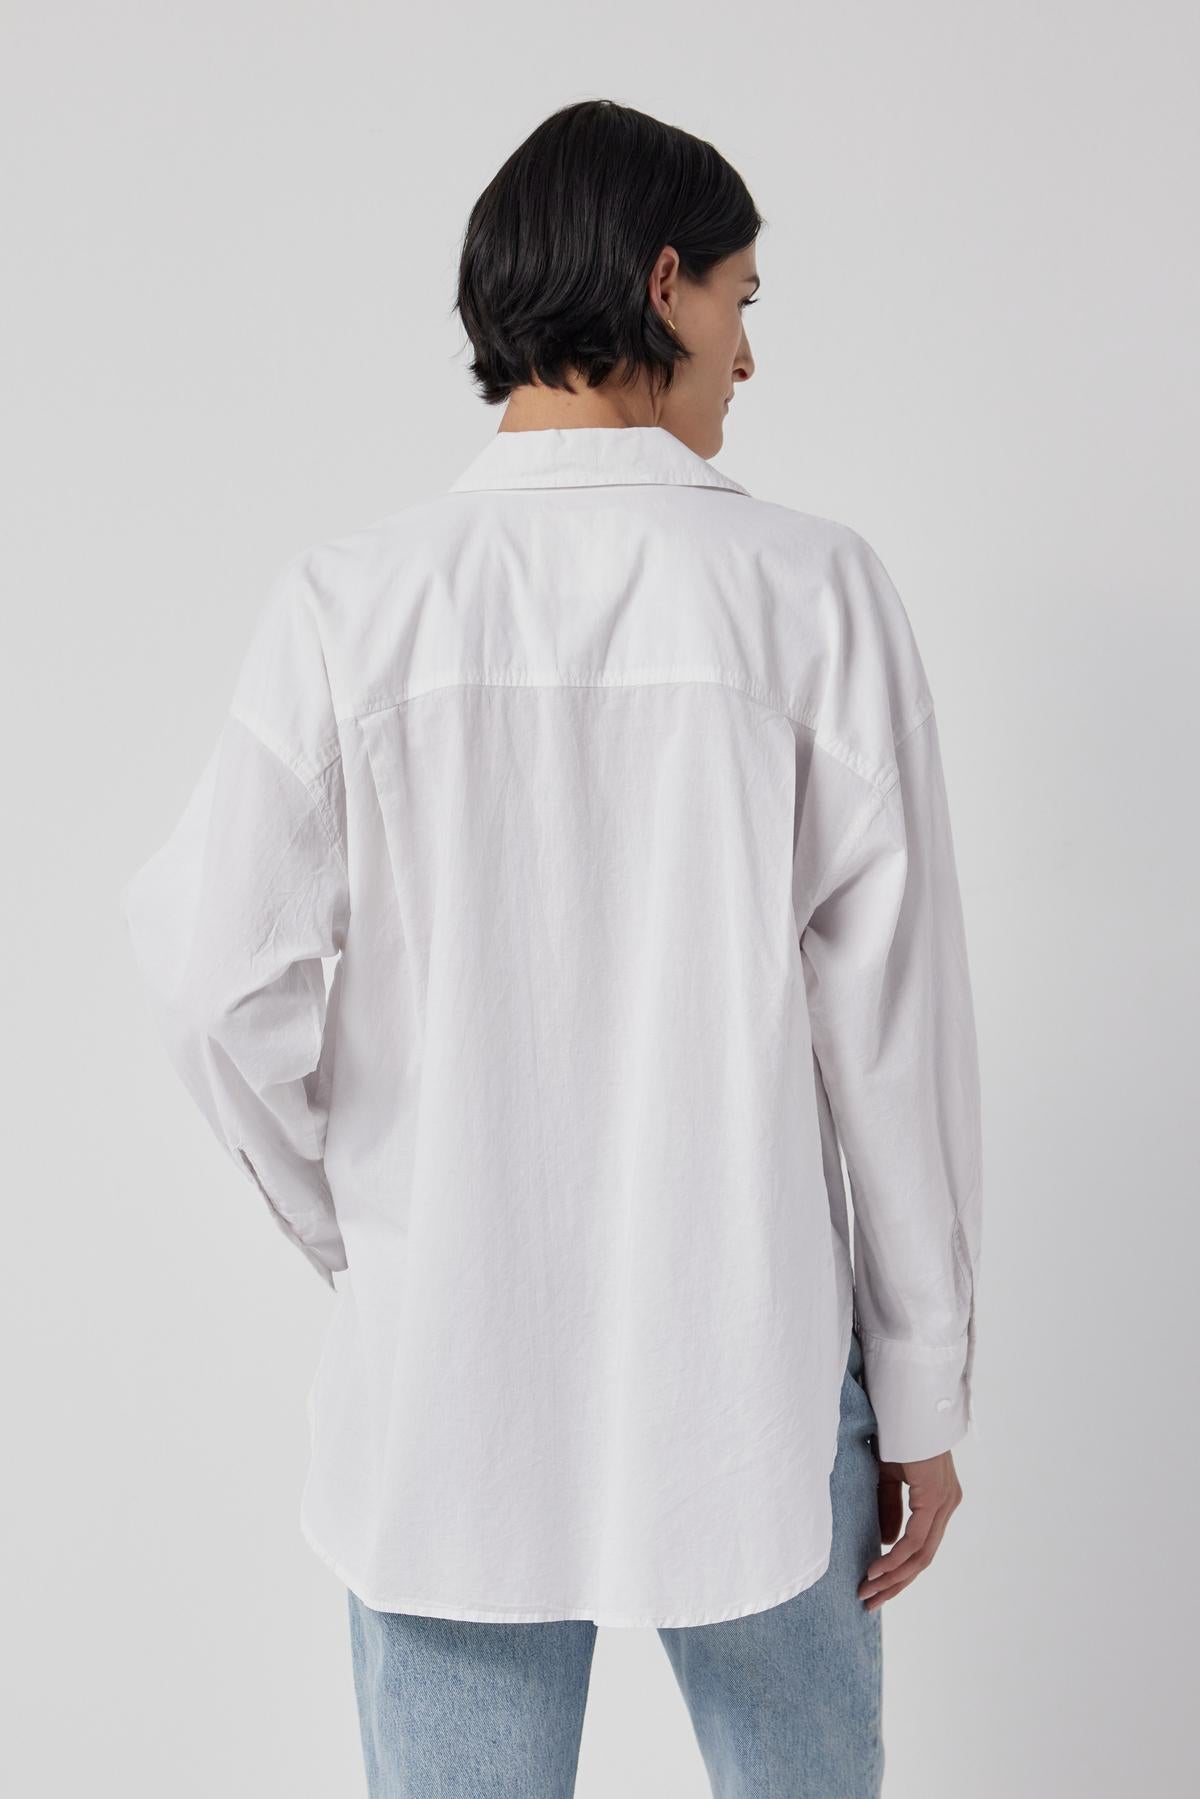 The back view of a woman wearing an oversized Velvet by Jenny Graham Redondo Button-Up Shirt, embracing the borrowed-from-the-boys silhouette fashion trend.-26861789216961